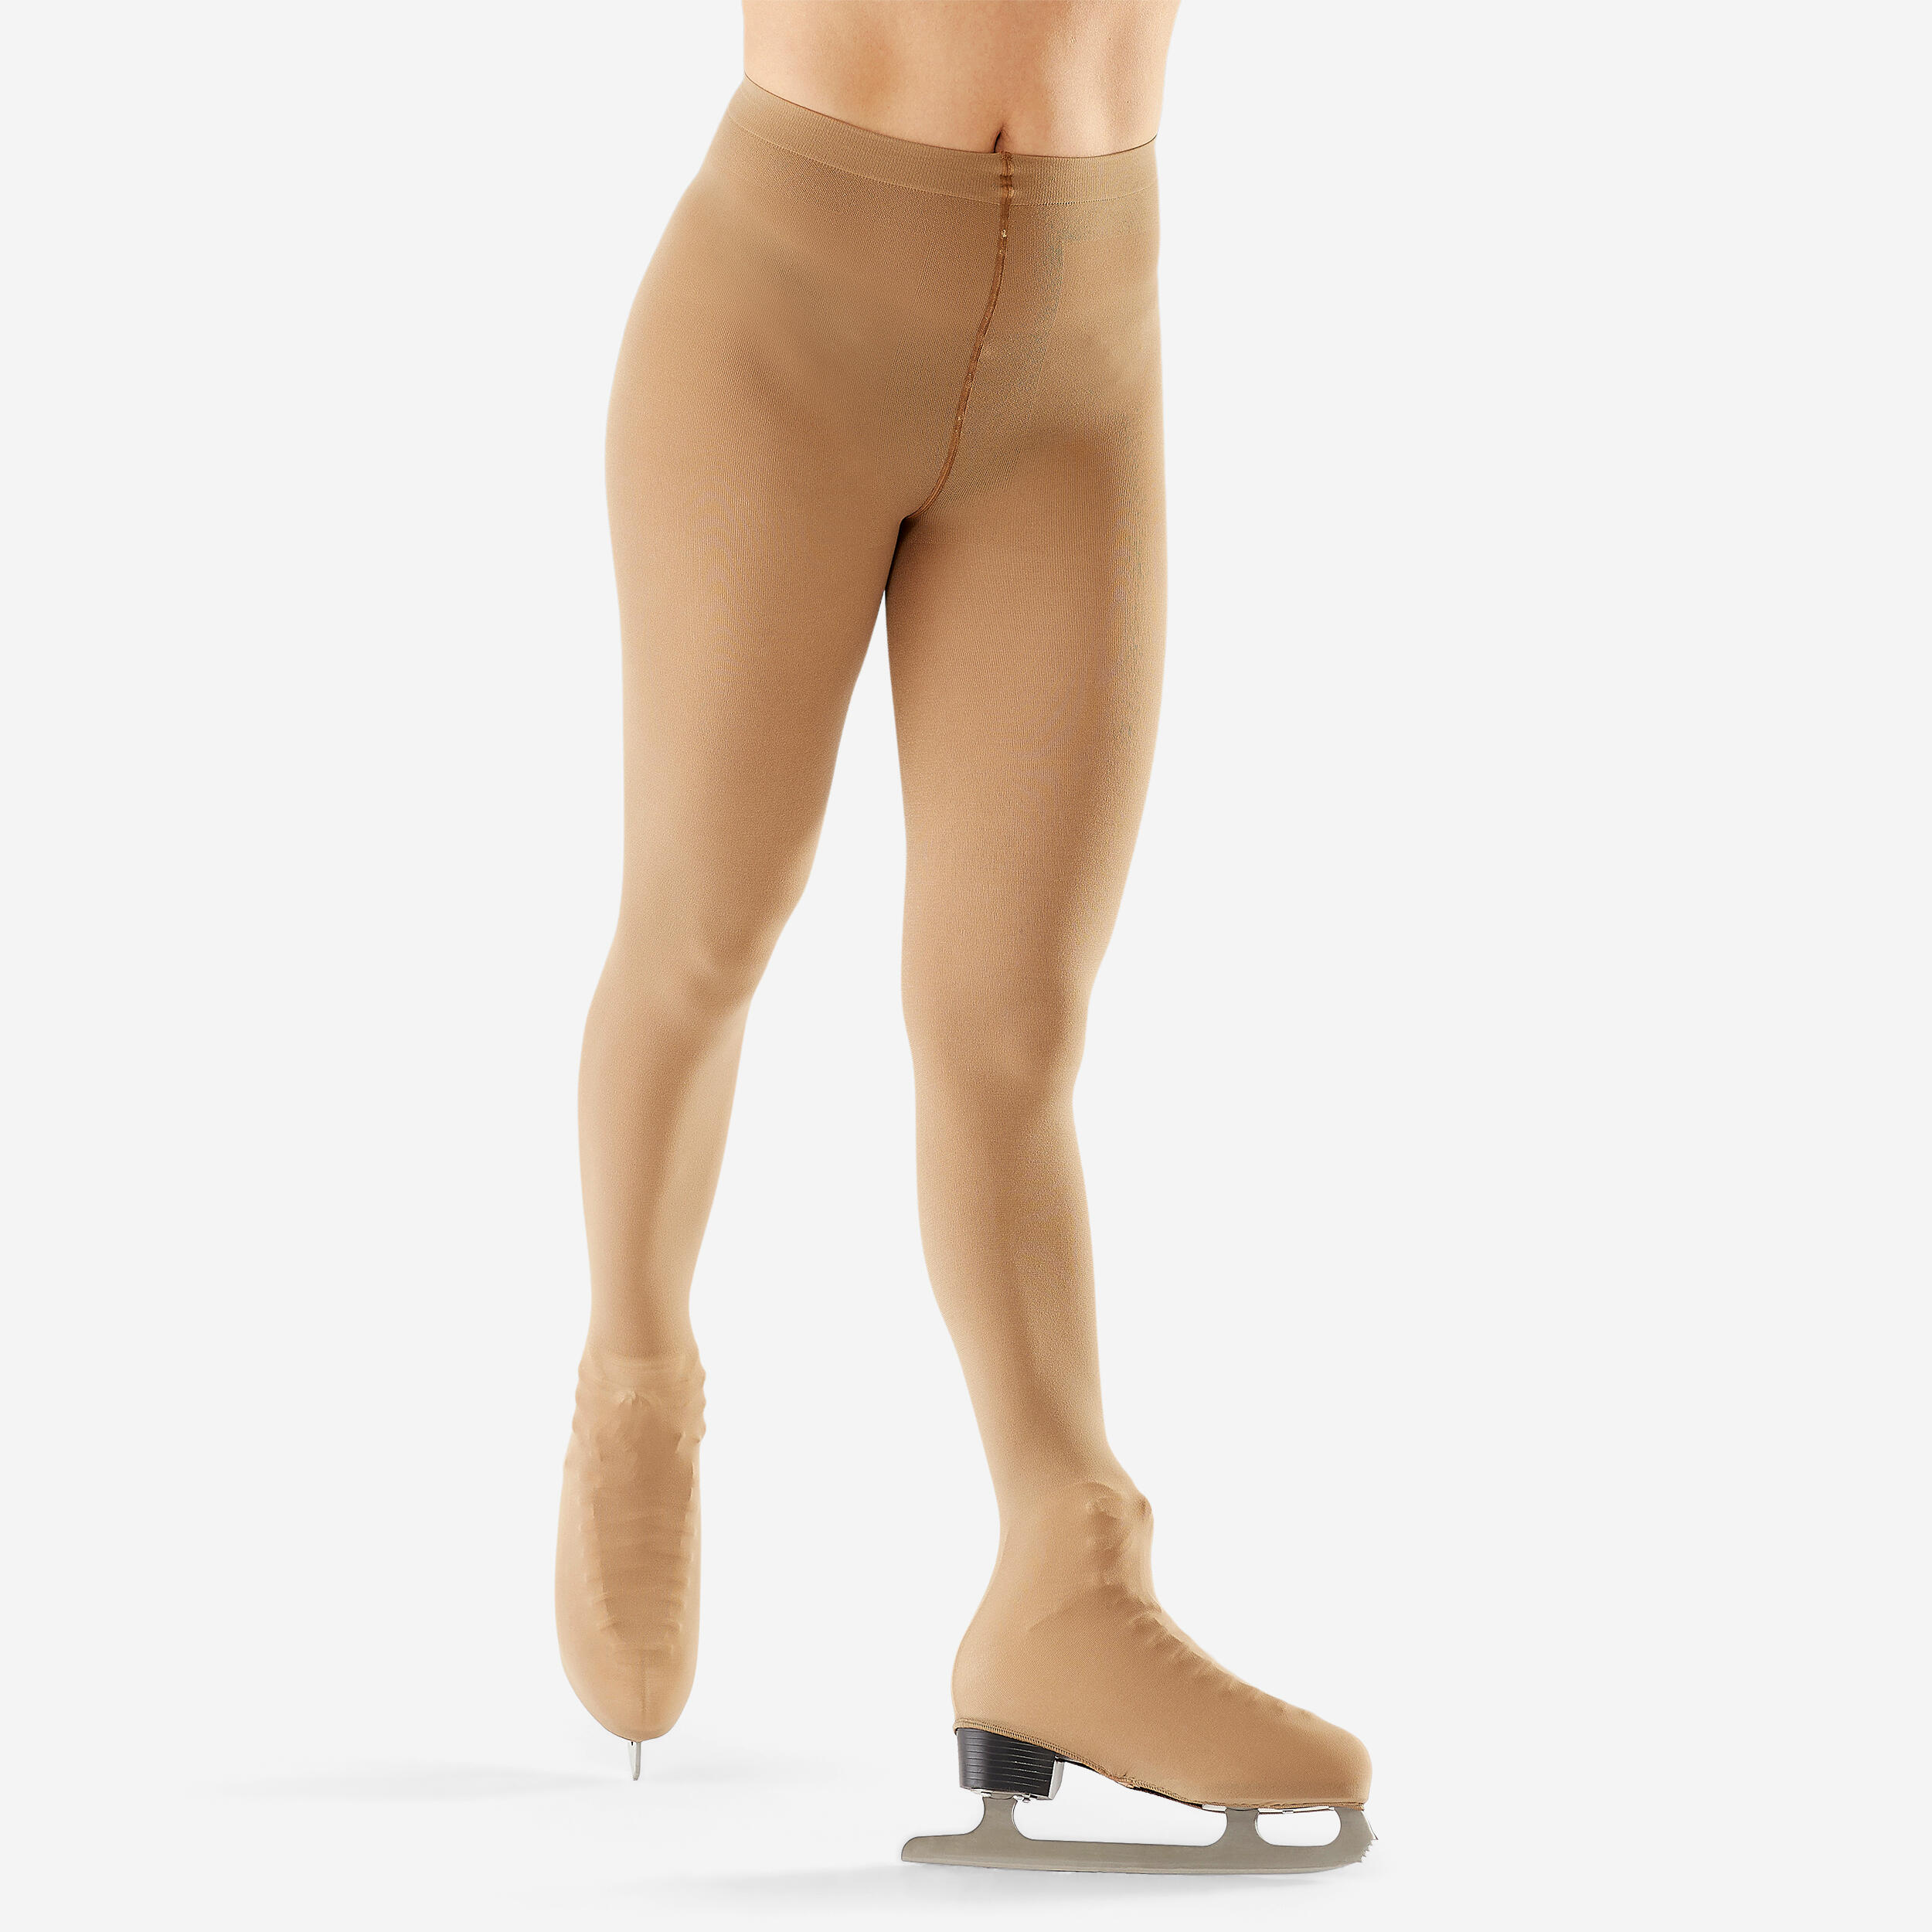 AXELYS Adult Figure Skating Overboot Tights